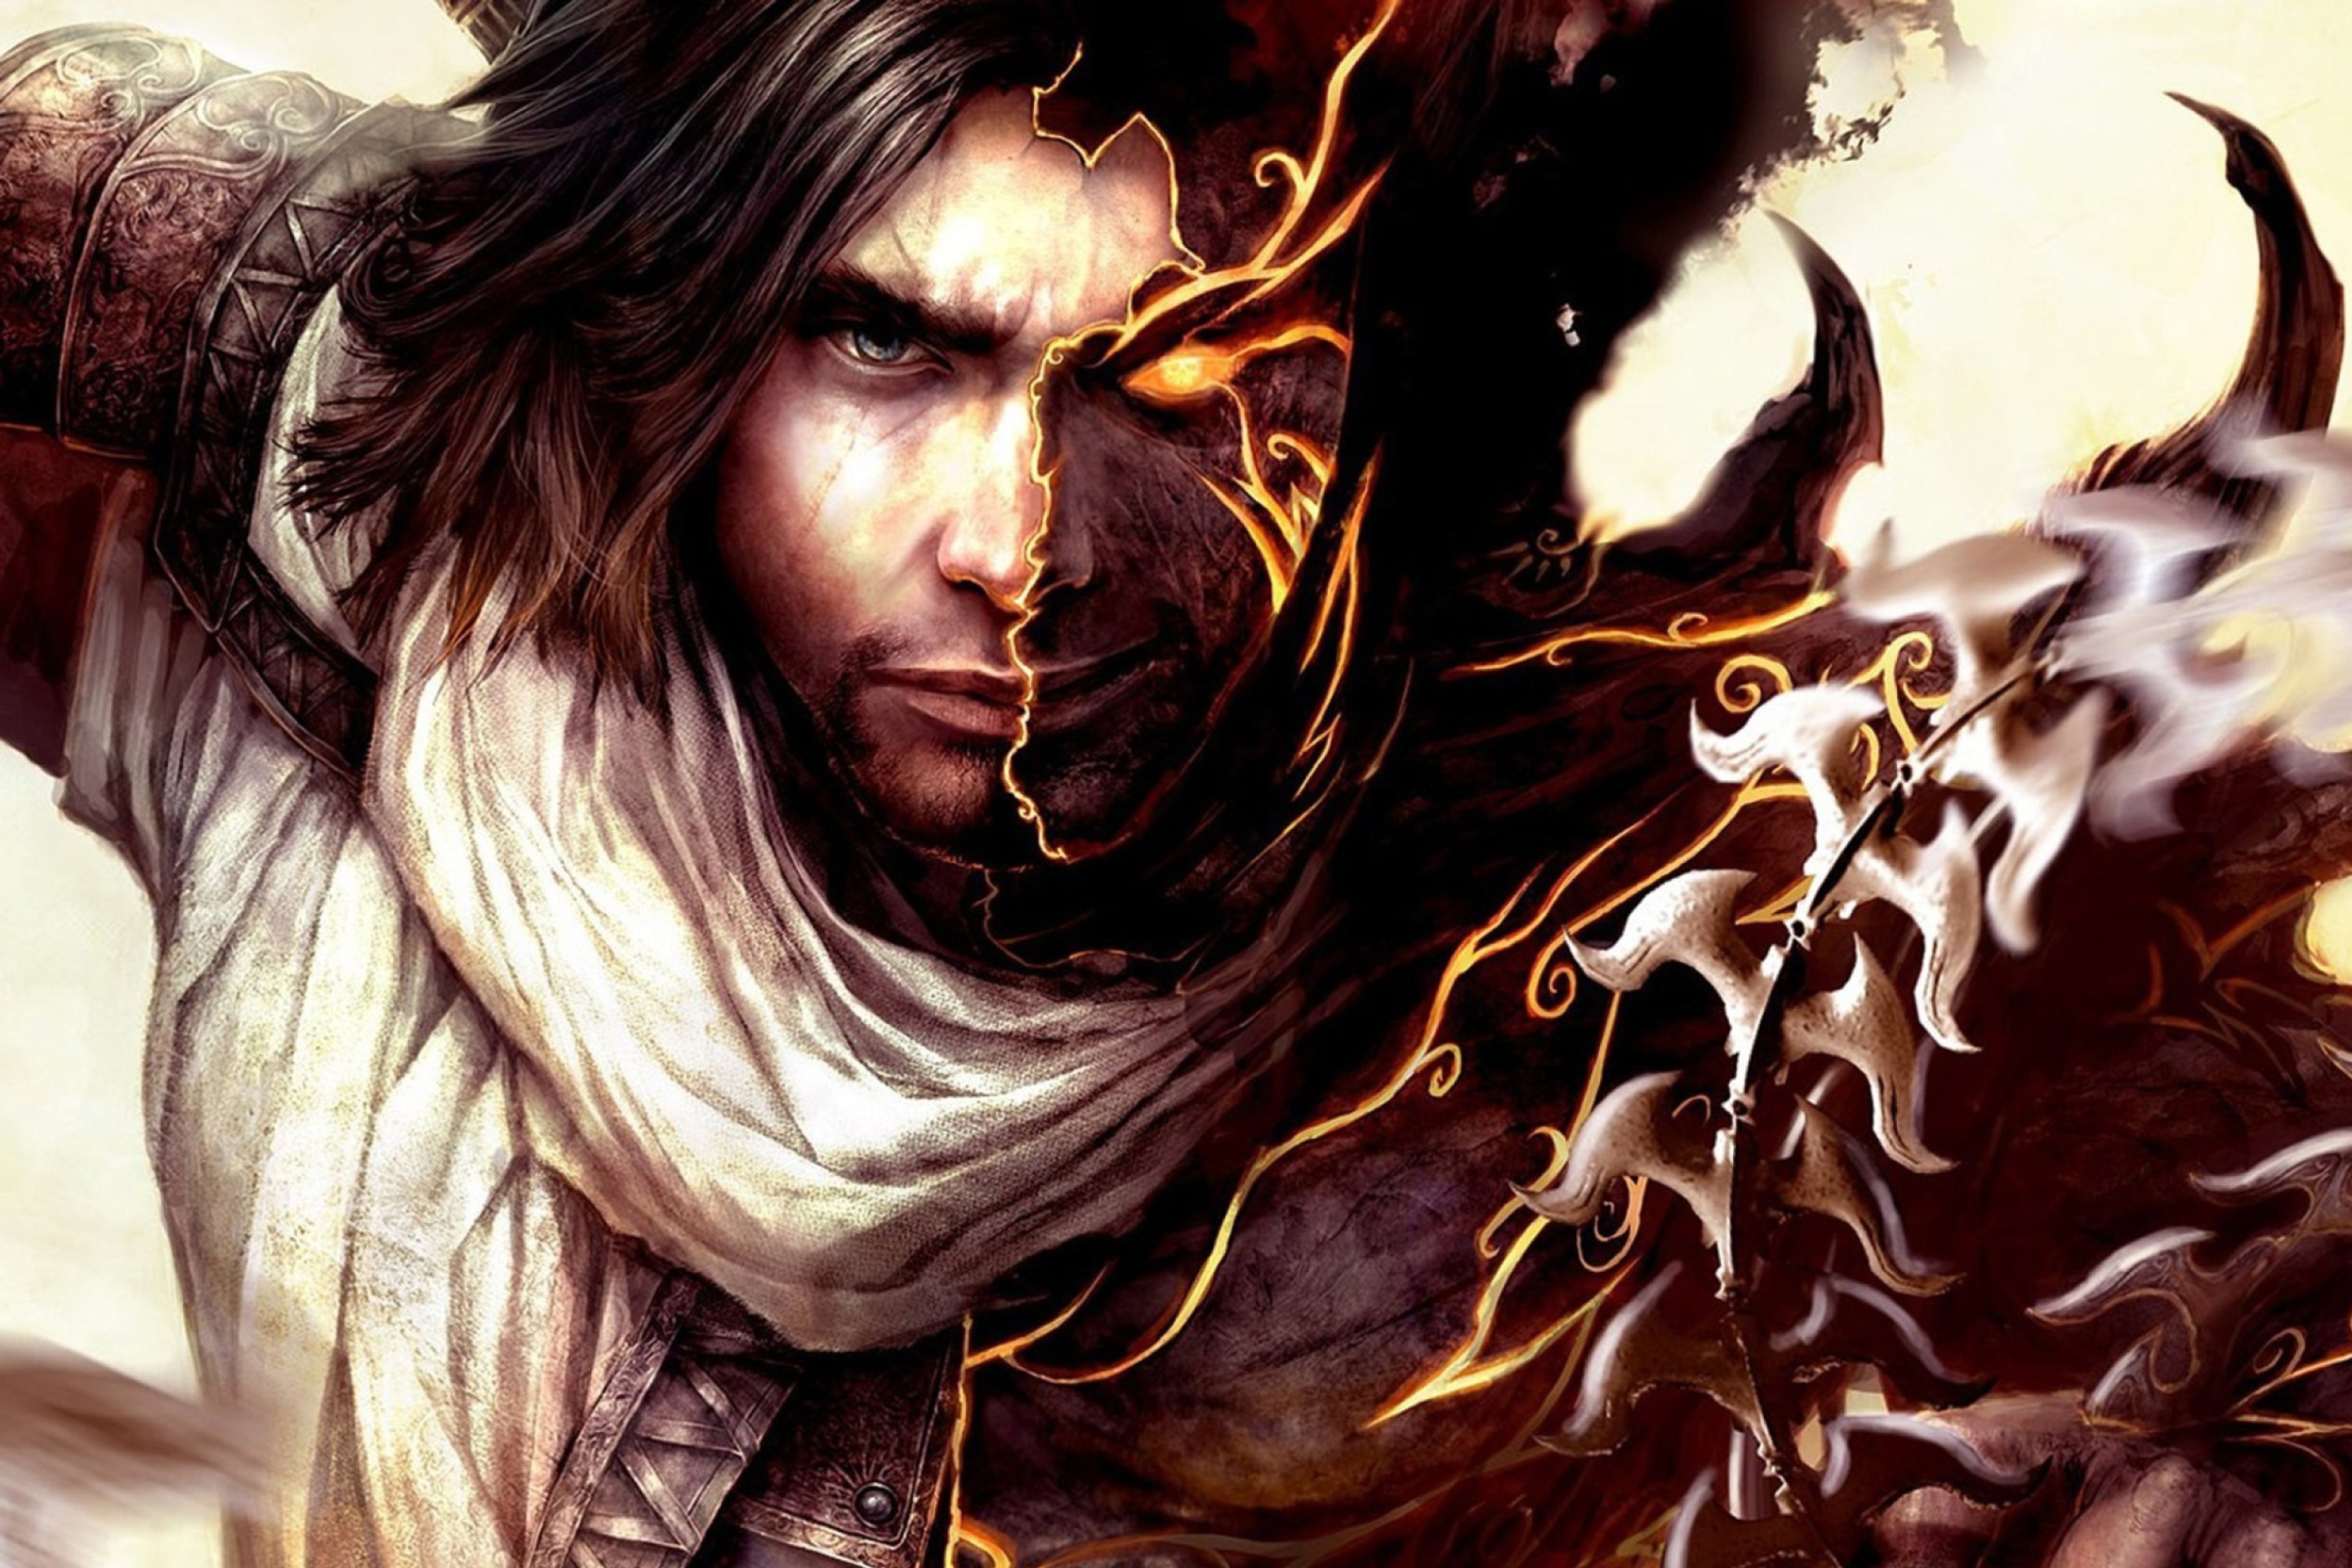 Prince Of Persia - The Two Thrones wallpaper 2880x1920